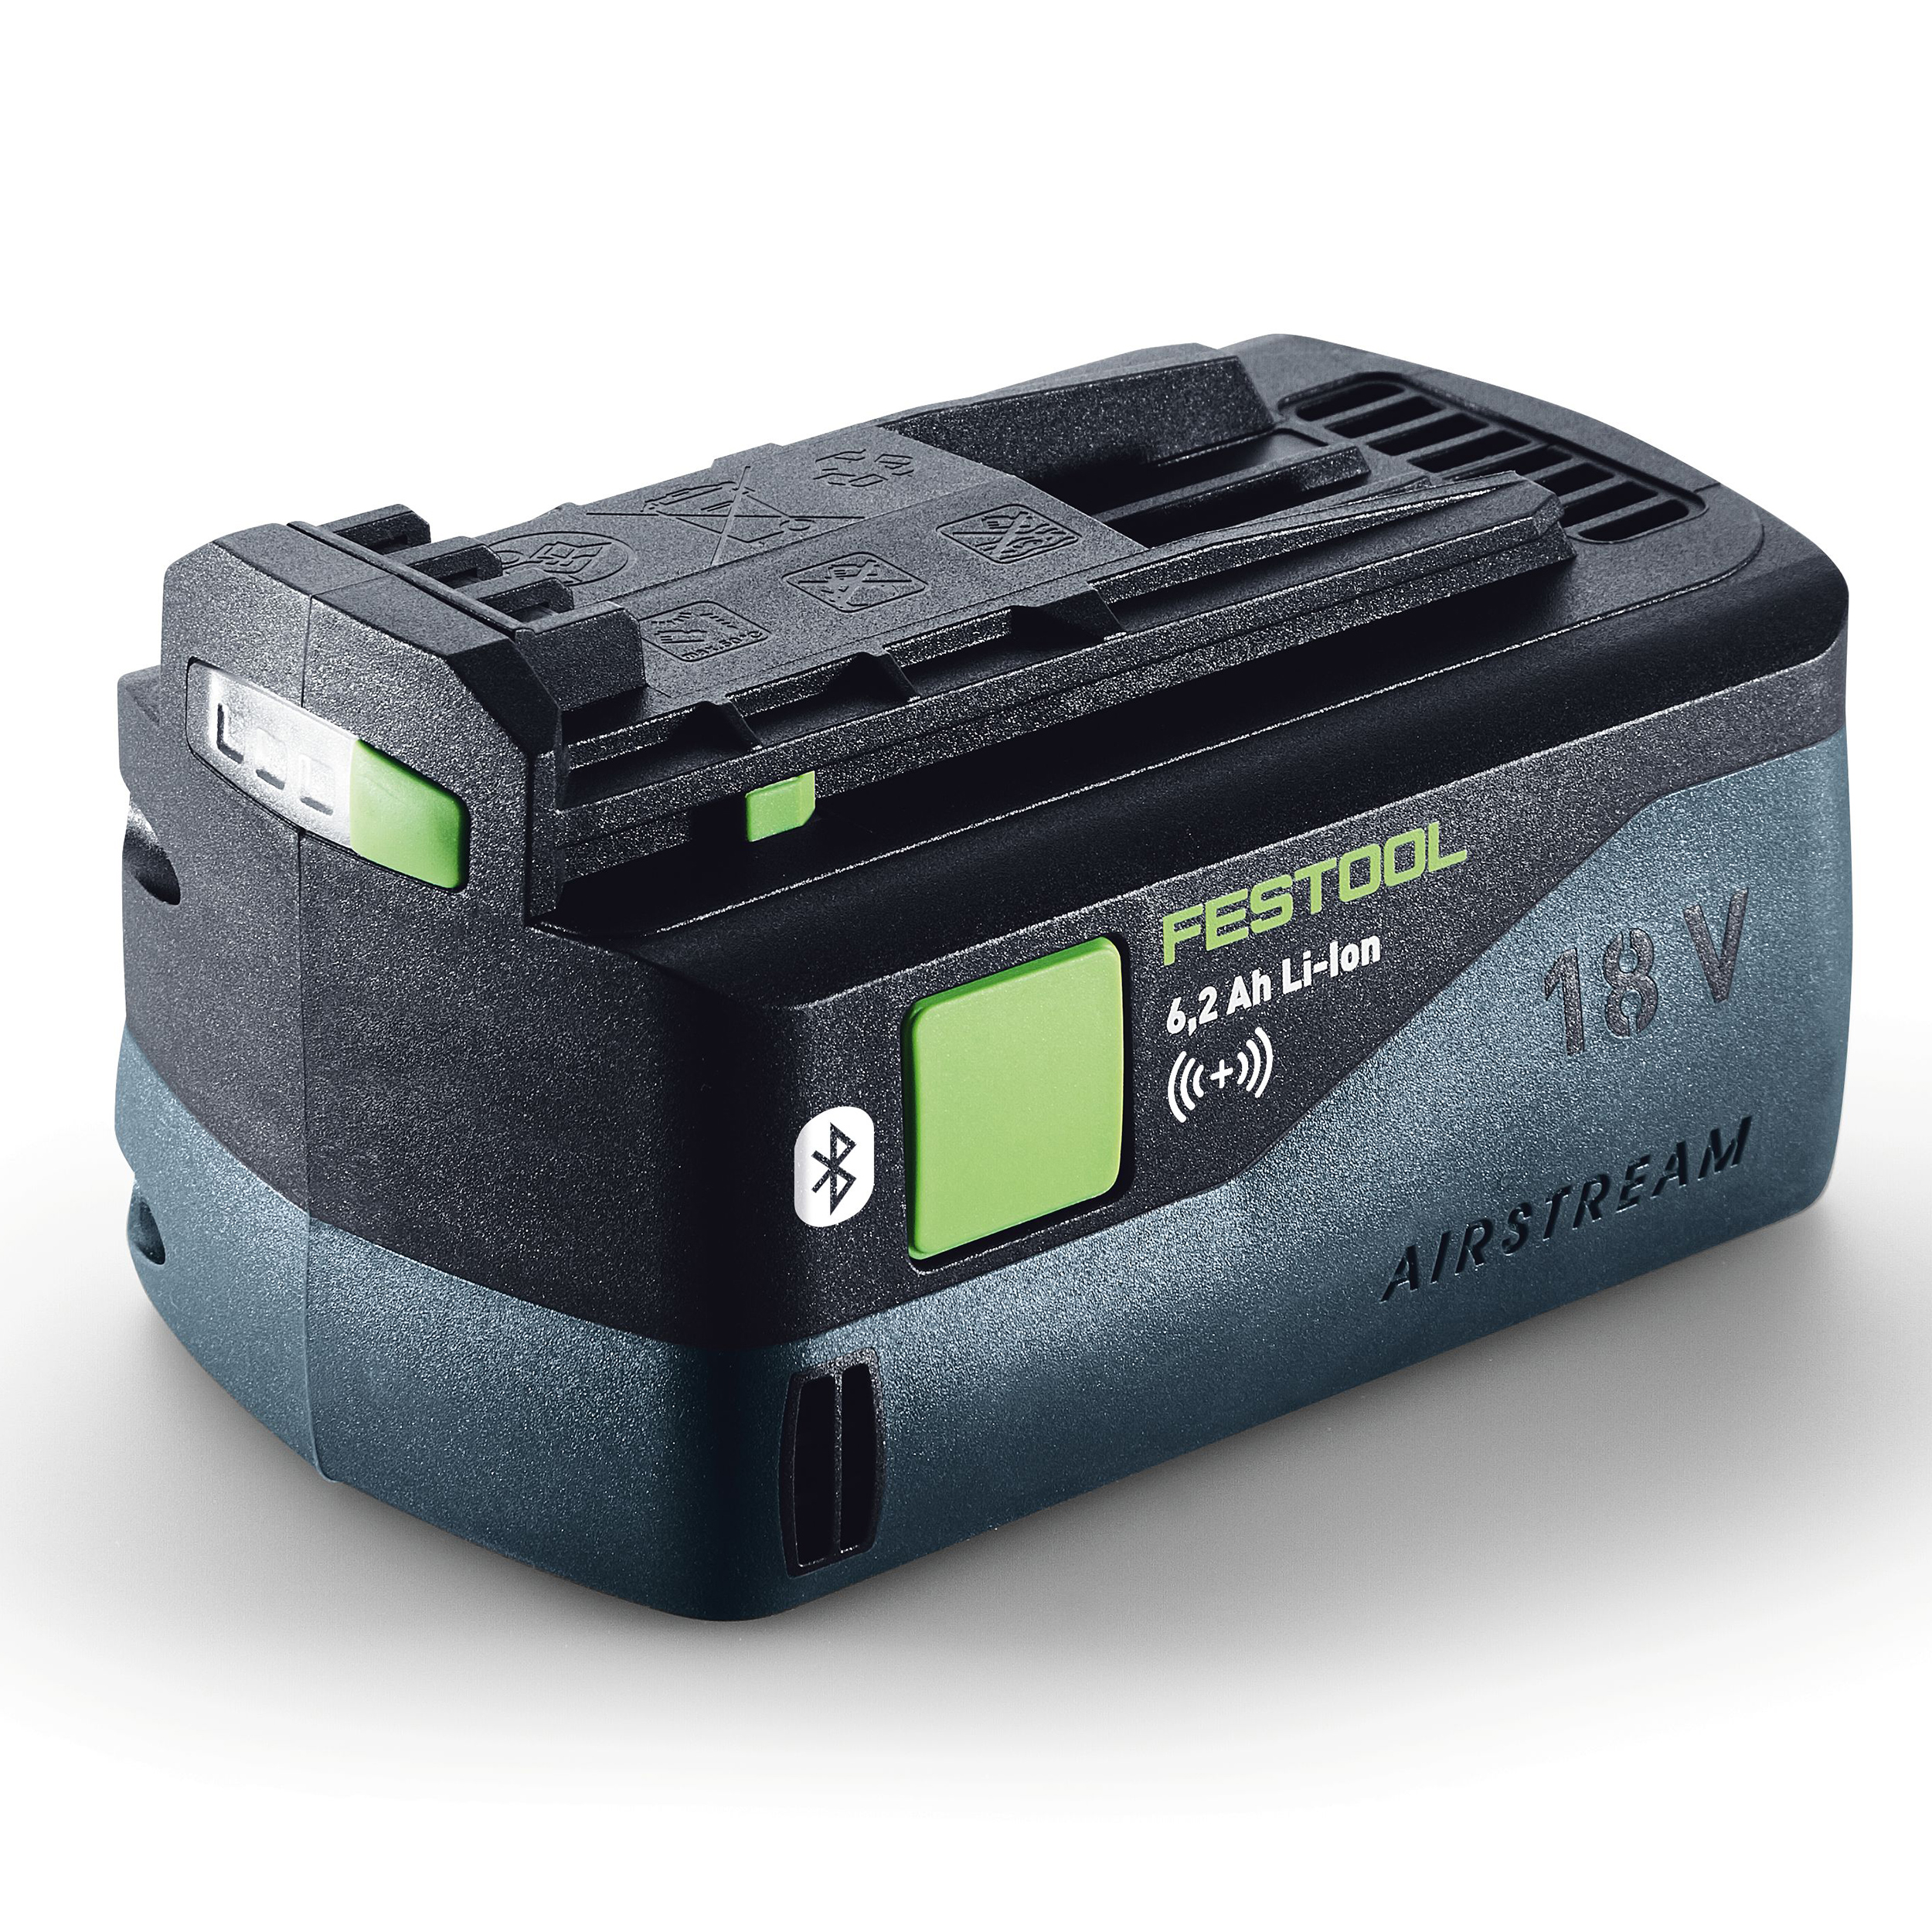 Festool Bluetooth 6.2ah Lithium-ion Battery Pack For 18v Cordless Tools